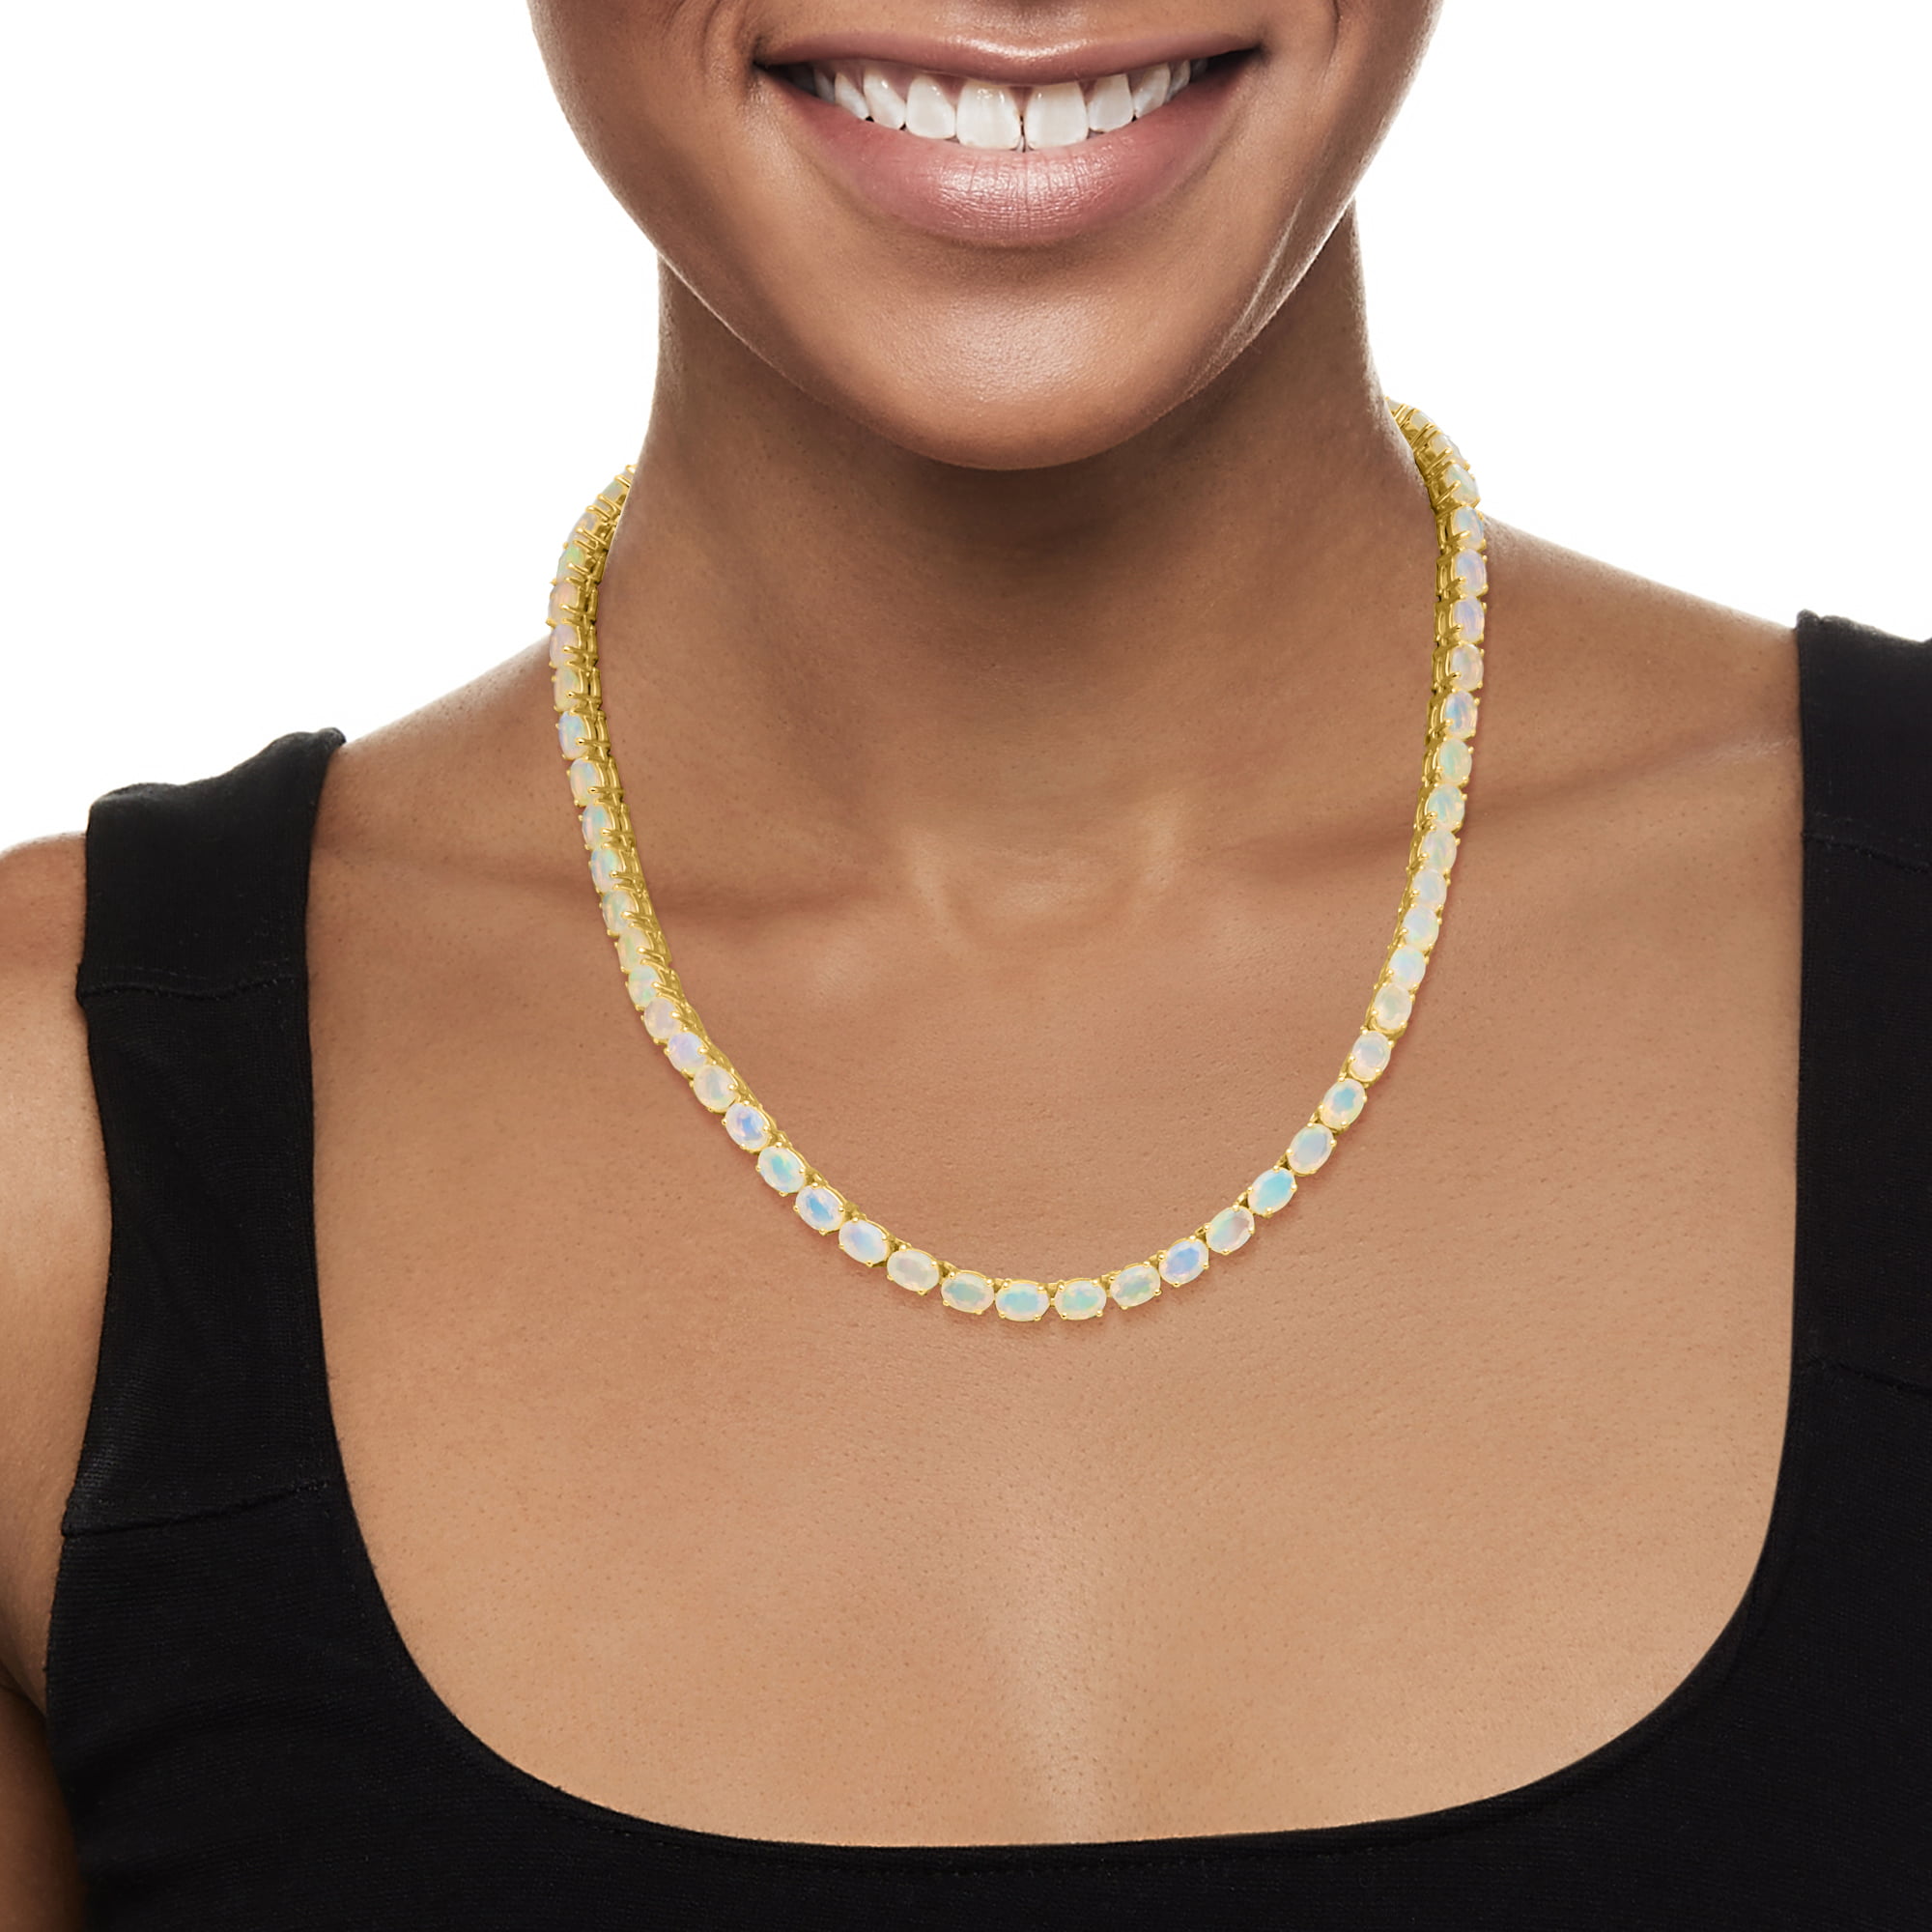 Adjustable Length Womens Cubic Zirconia 14K Gold Over Silver Tennis  Necklaces - JCPenney